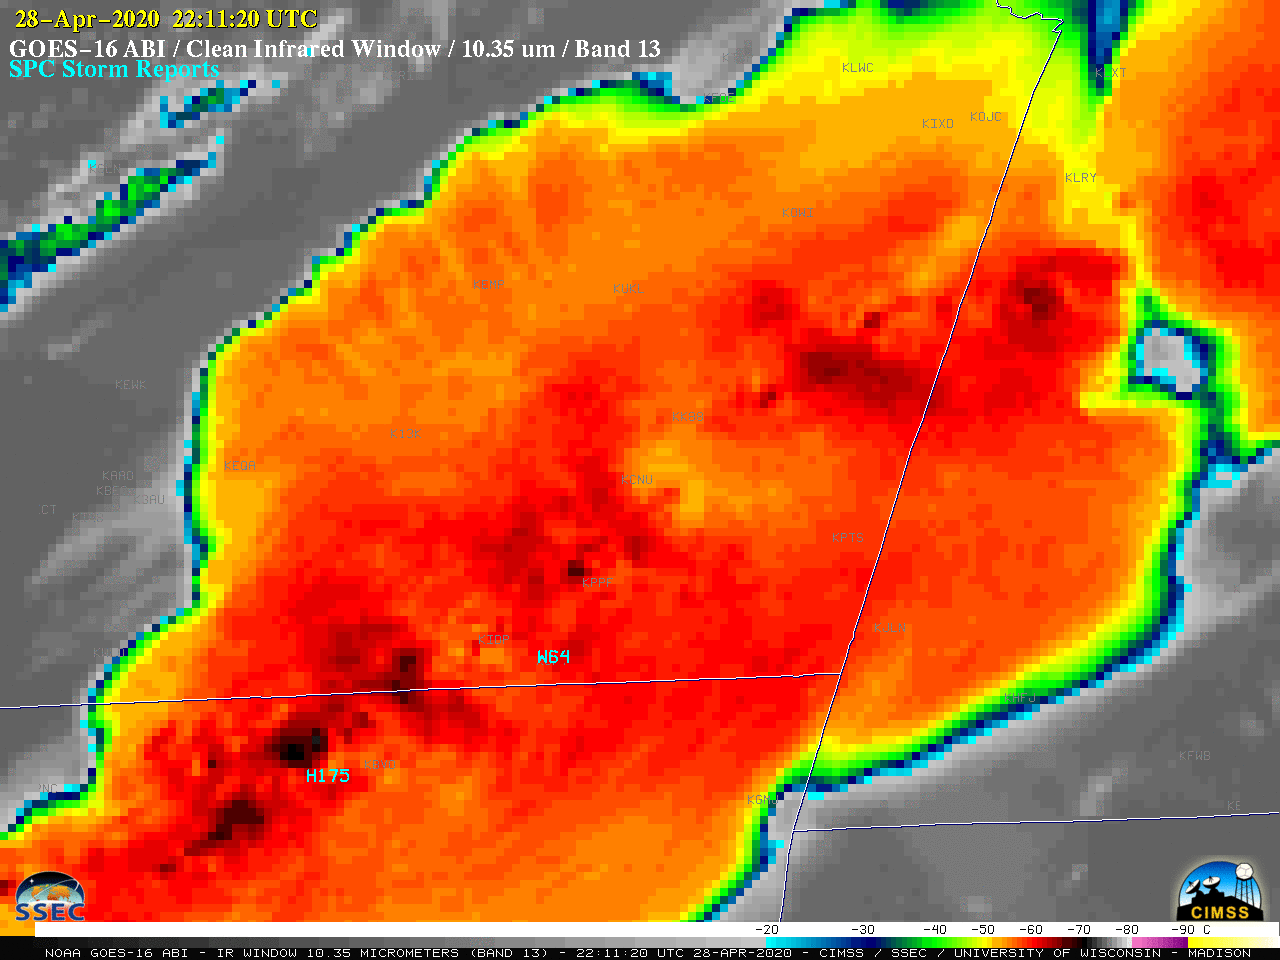 GOES-16 "Clean" Infrared Window (10.35 µm) images, with time-matched SPC Storm Reports plotted in cyan [click to play animation | MP4]